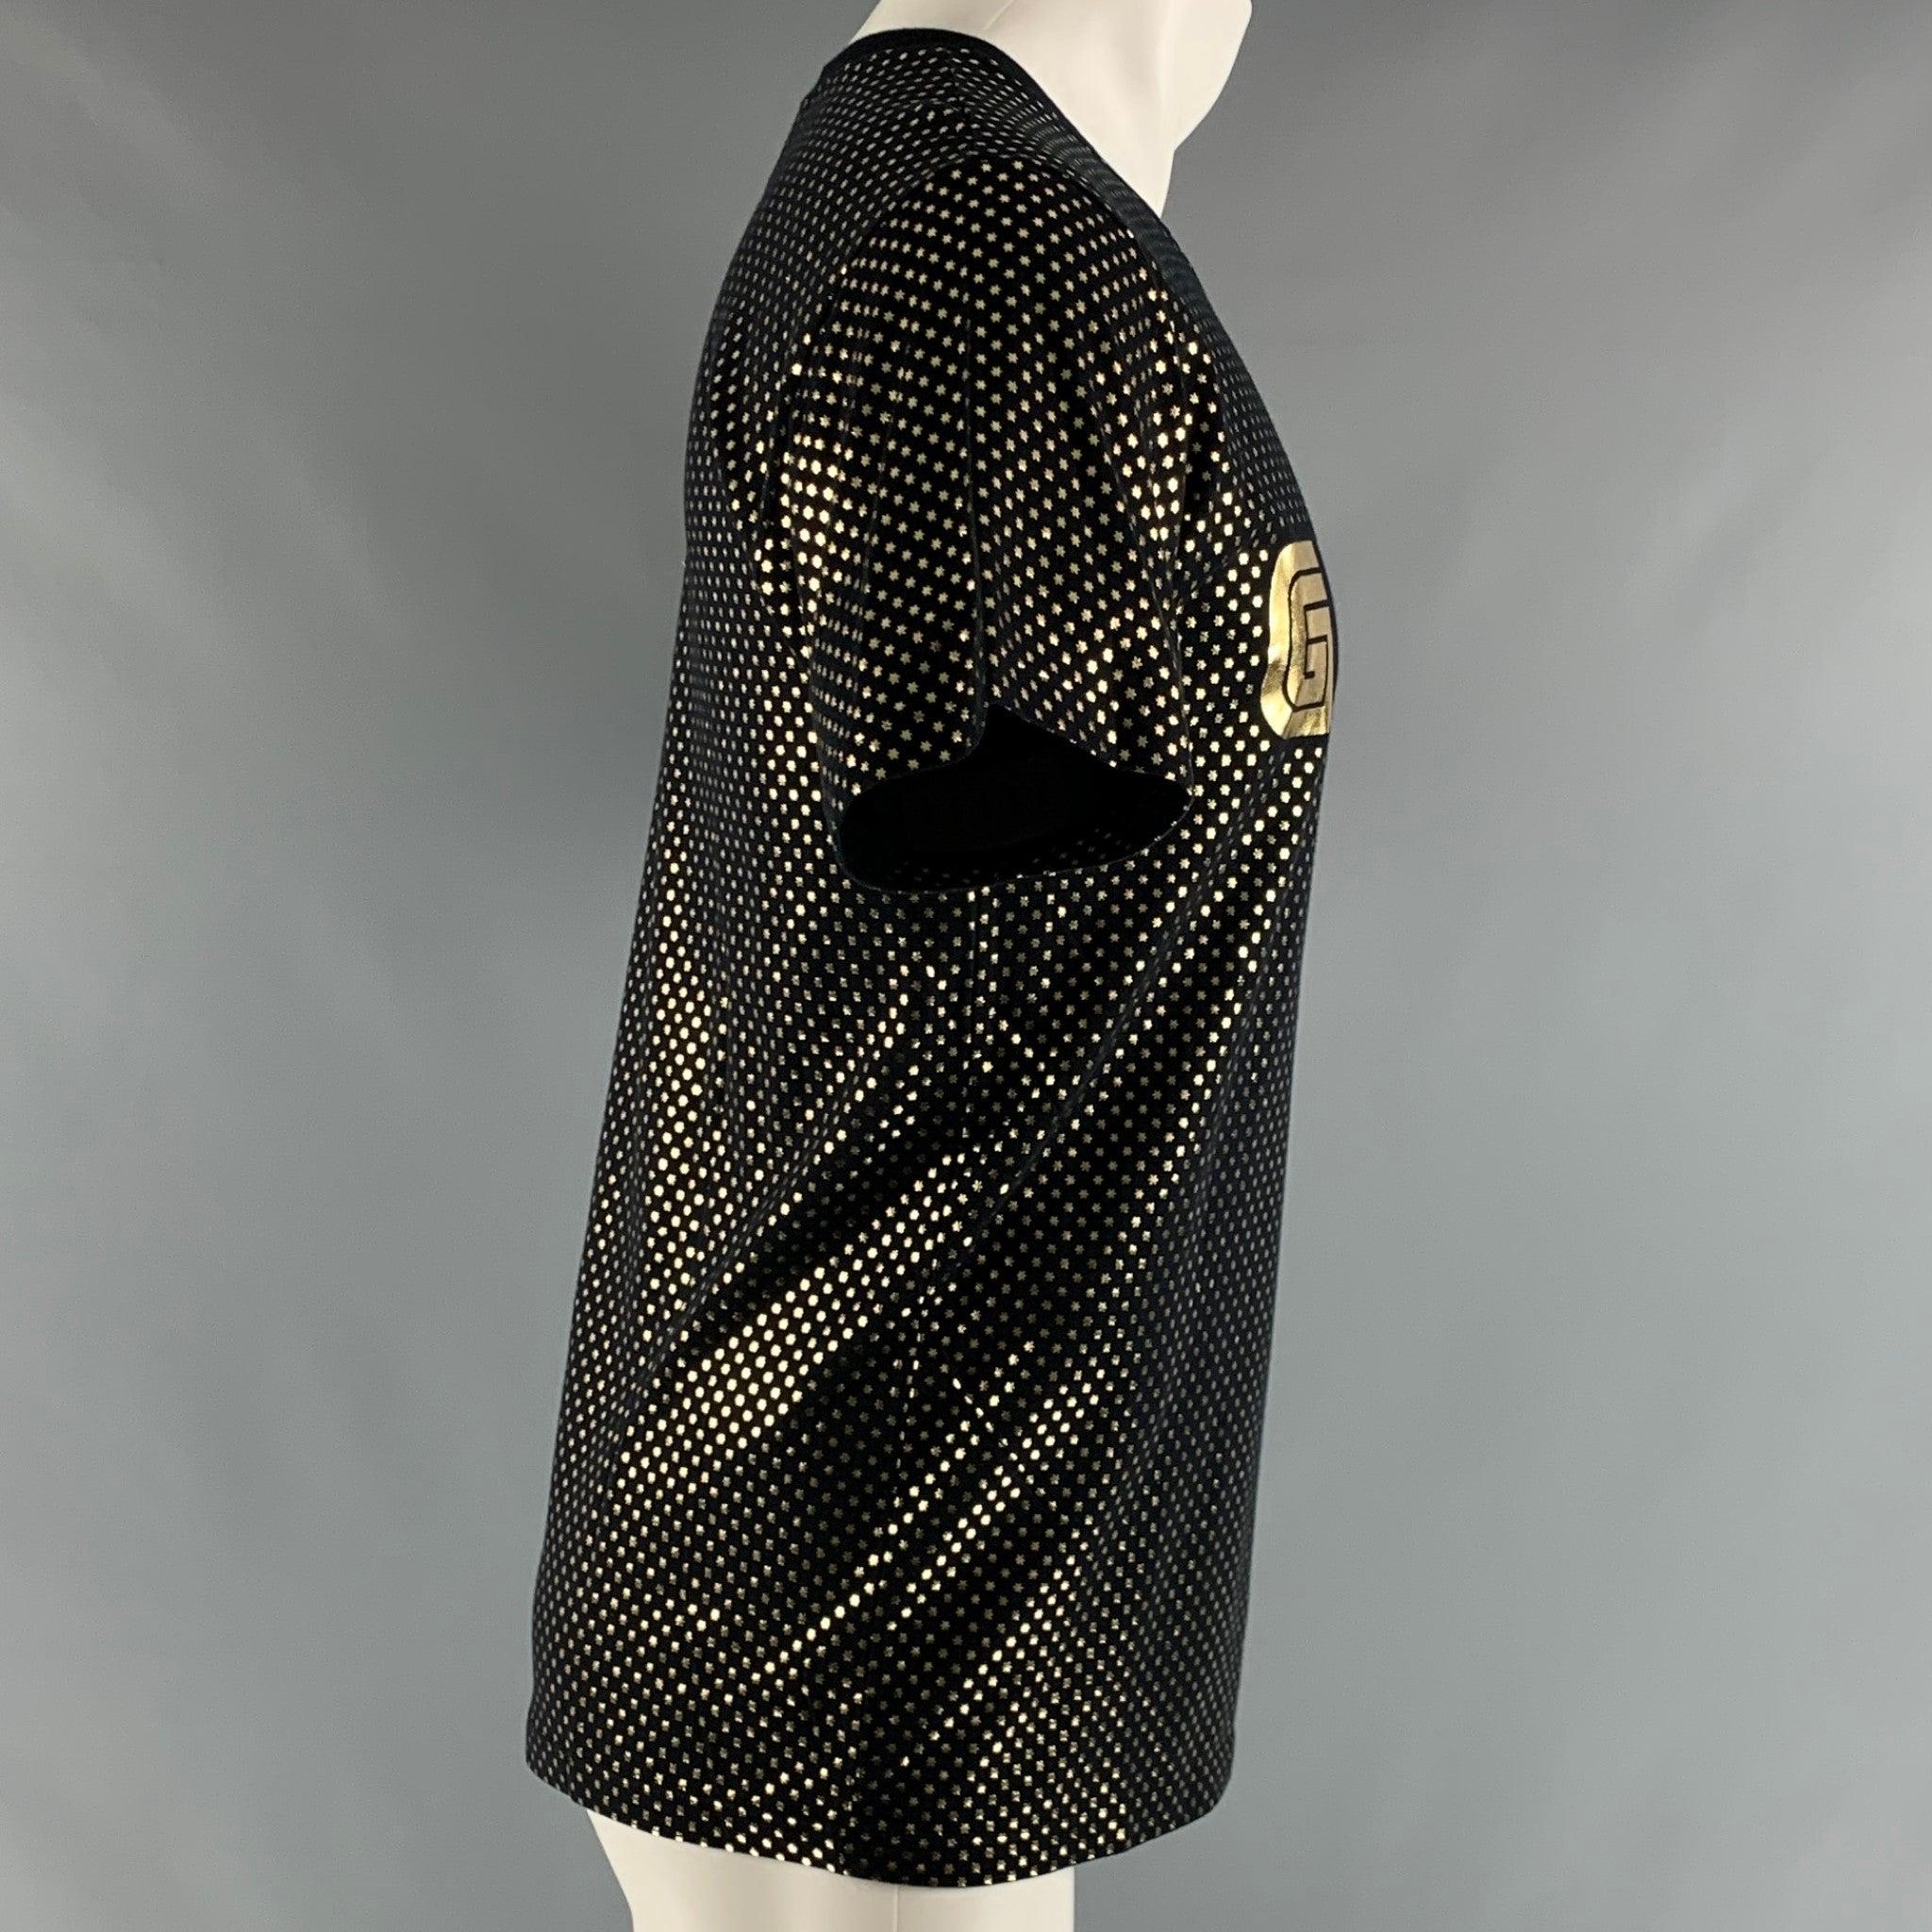 GUCCI t-shirt comes in a black jersey cotton knit material featuring a gold tone starts print motif, and a crew-neck. Made in Italy.Excellent Pre- Owned Material. 

Marked:   XS 

Measurements: 
 
Shoulder: 18.5 inches Chest: 40 inches Sleeve: 8